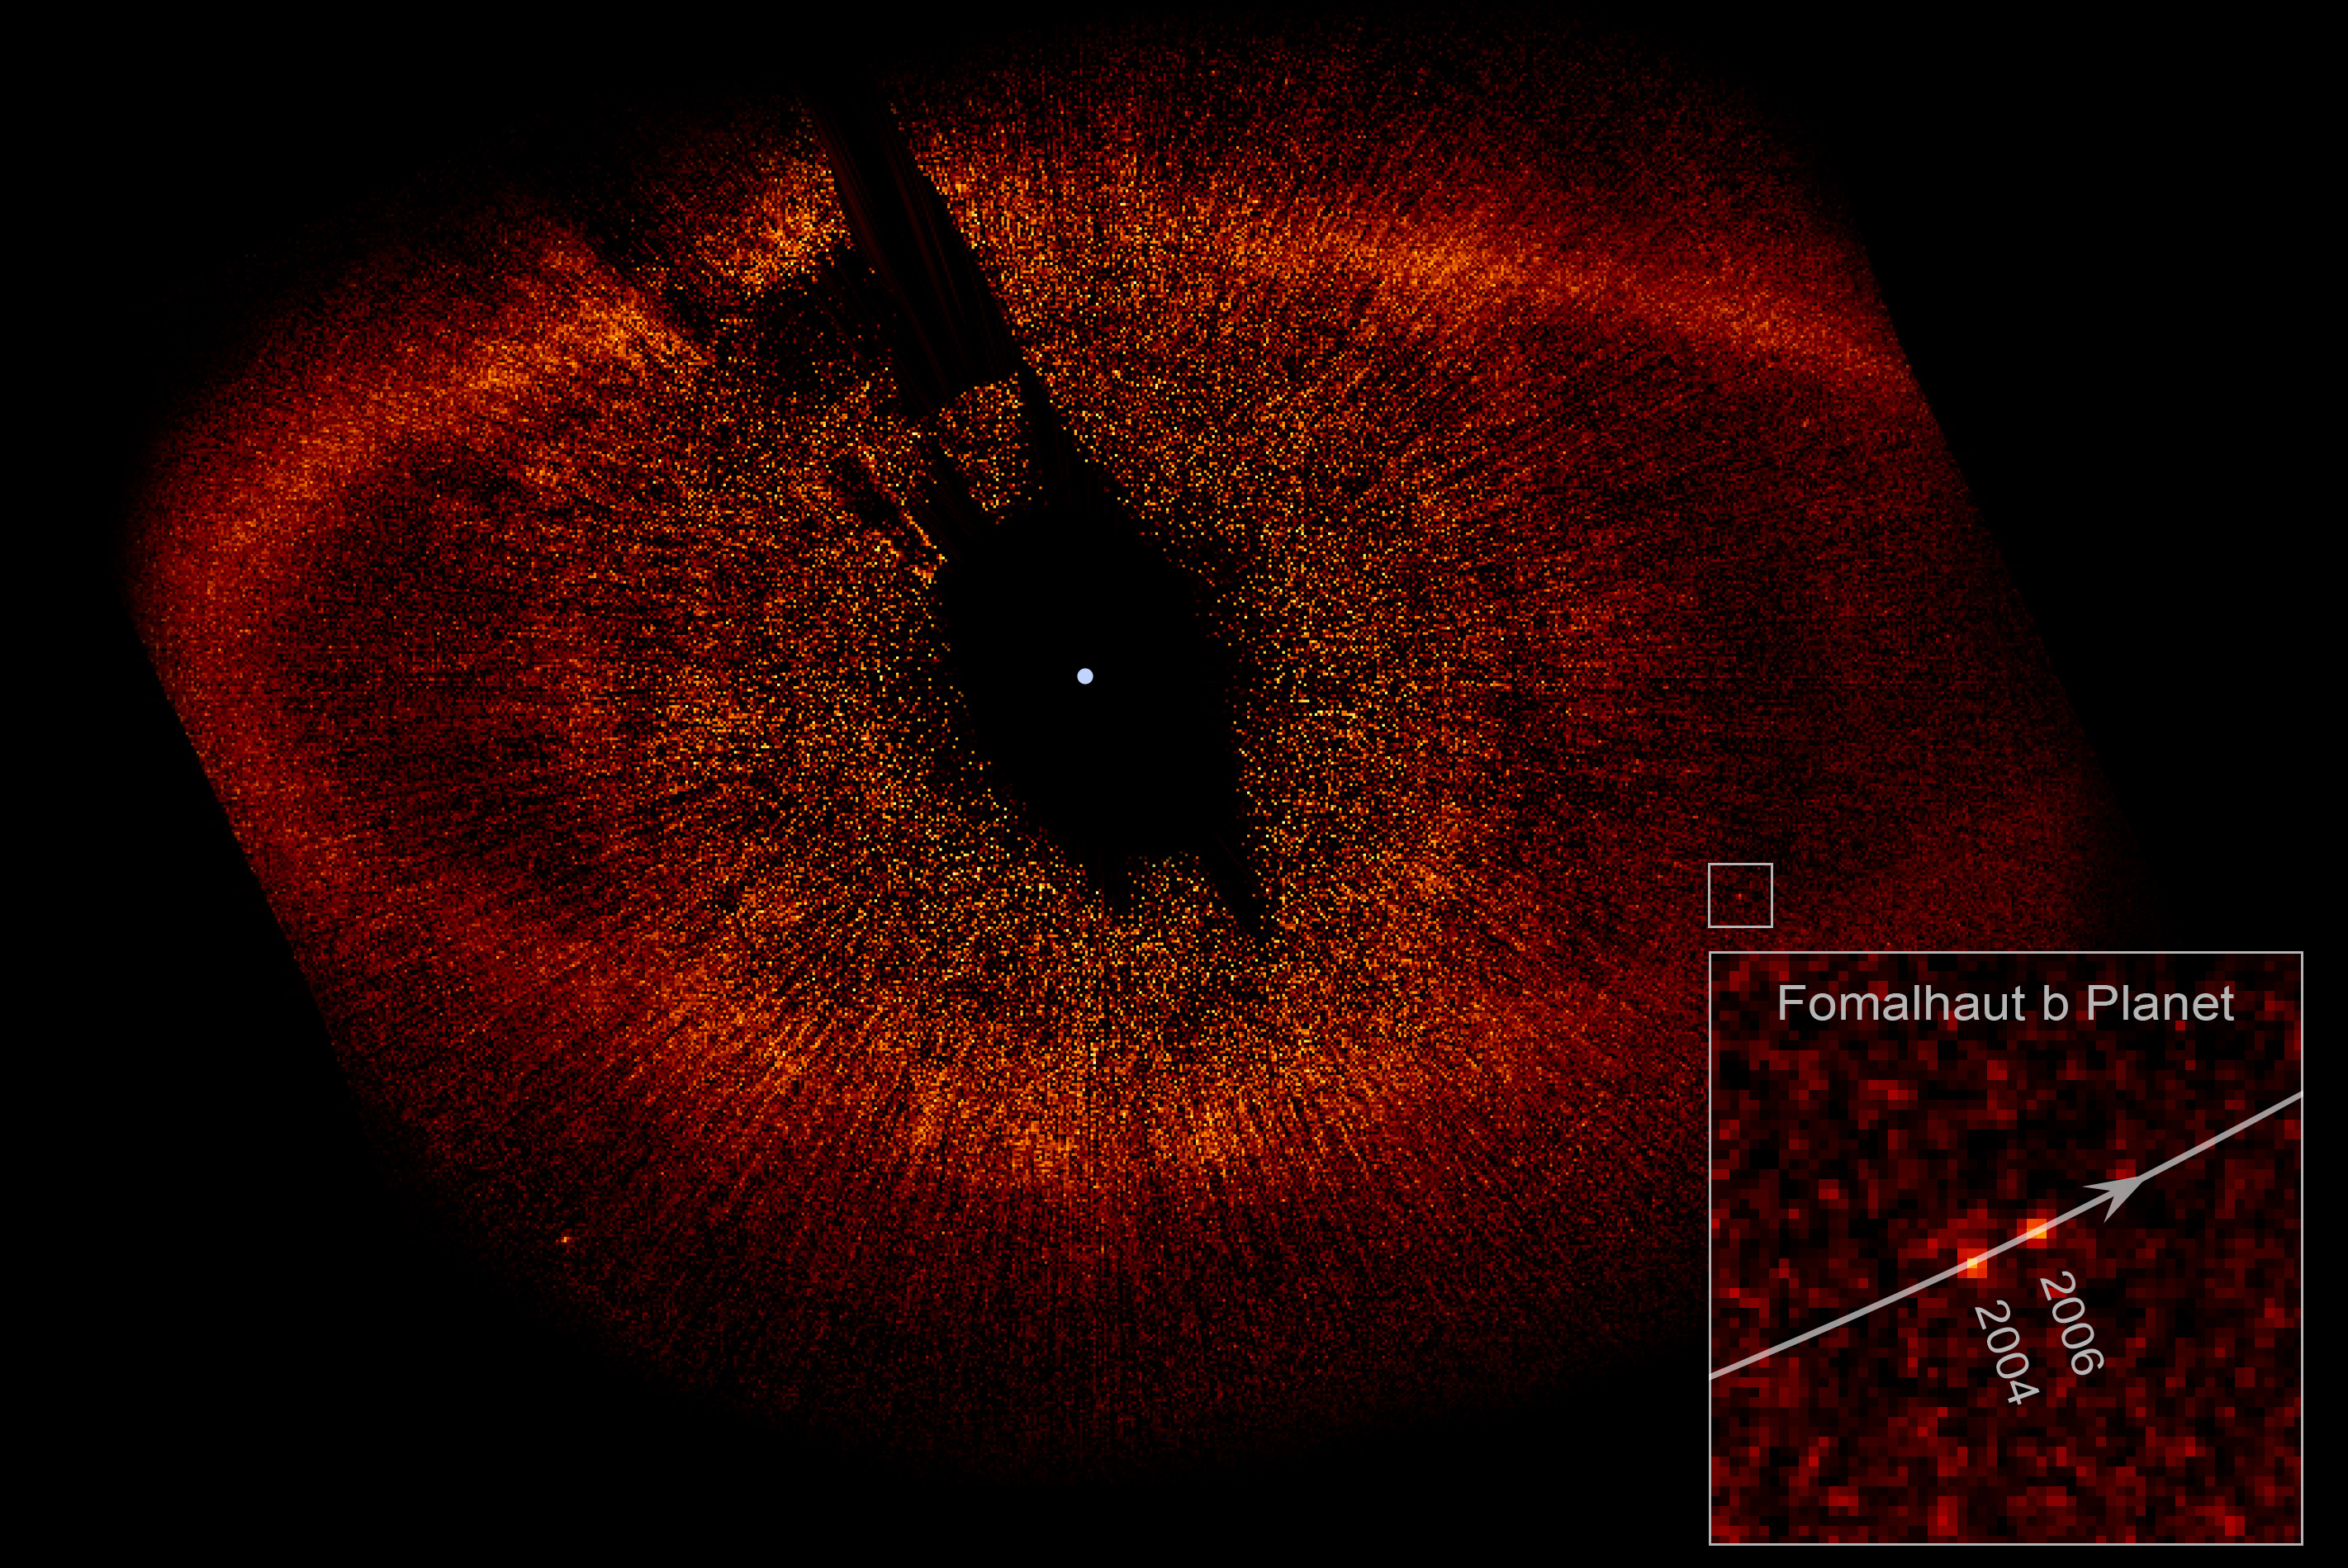 Fomalhaut_with_Disk_Ring_and_extrasolar_planet_b.jpg